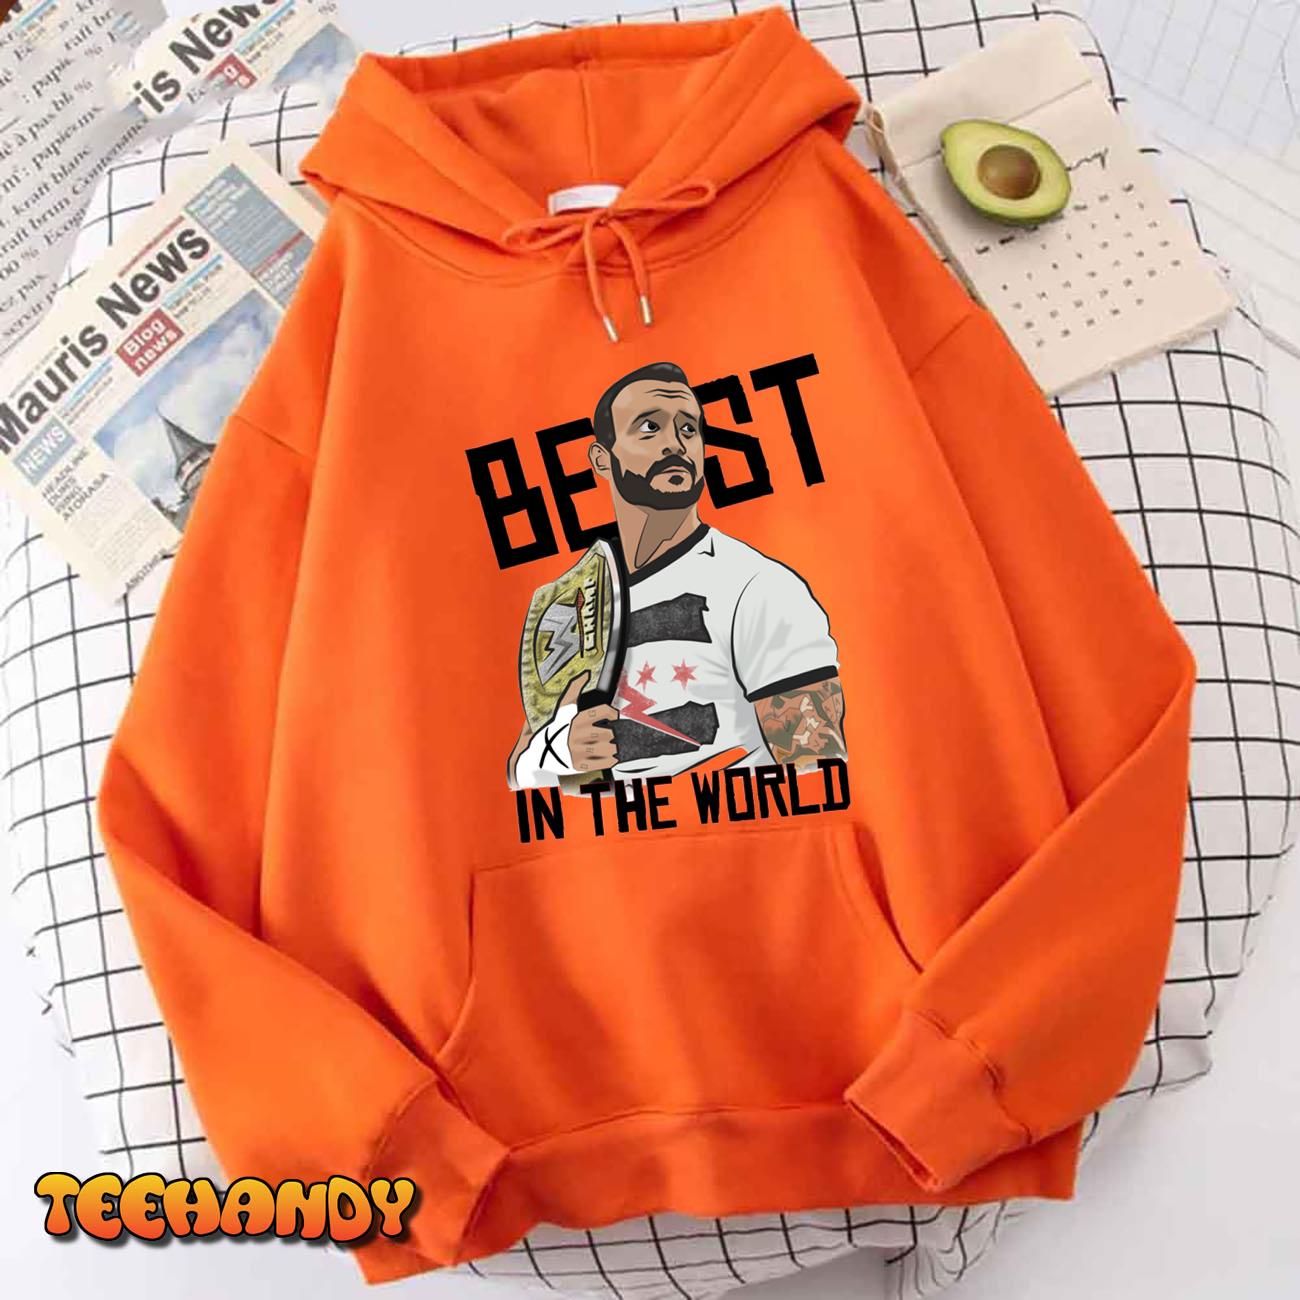 Cm Punk The Best In The World  Unisex Hoodie